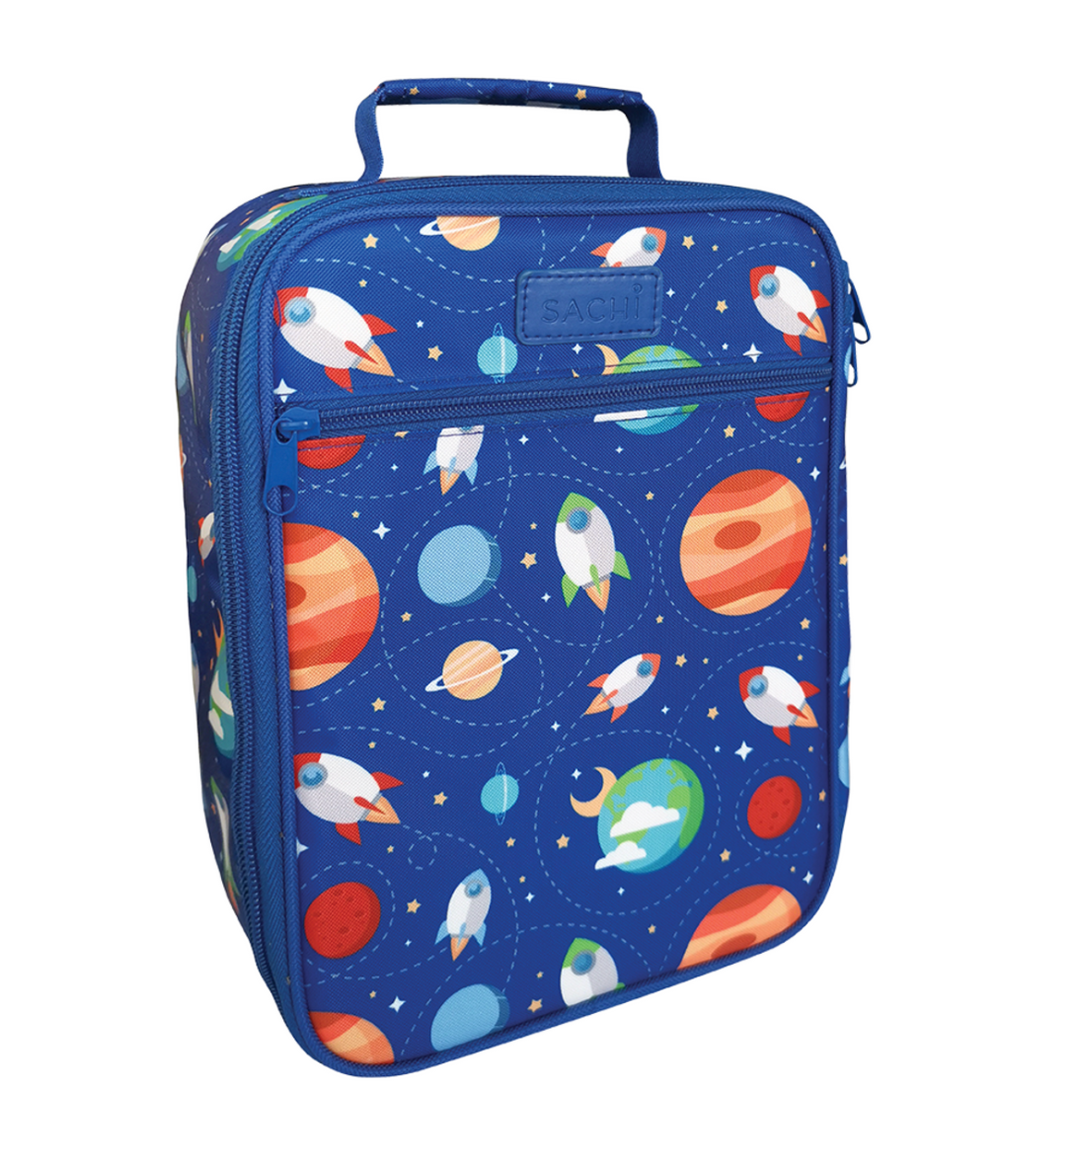 Sachi Insulated Lunch Bag, Food Jar & Bottle Bundle - Outer Space